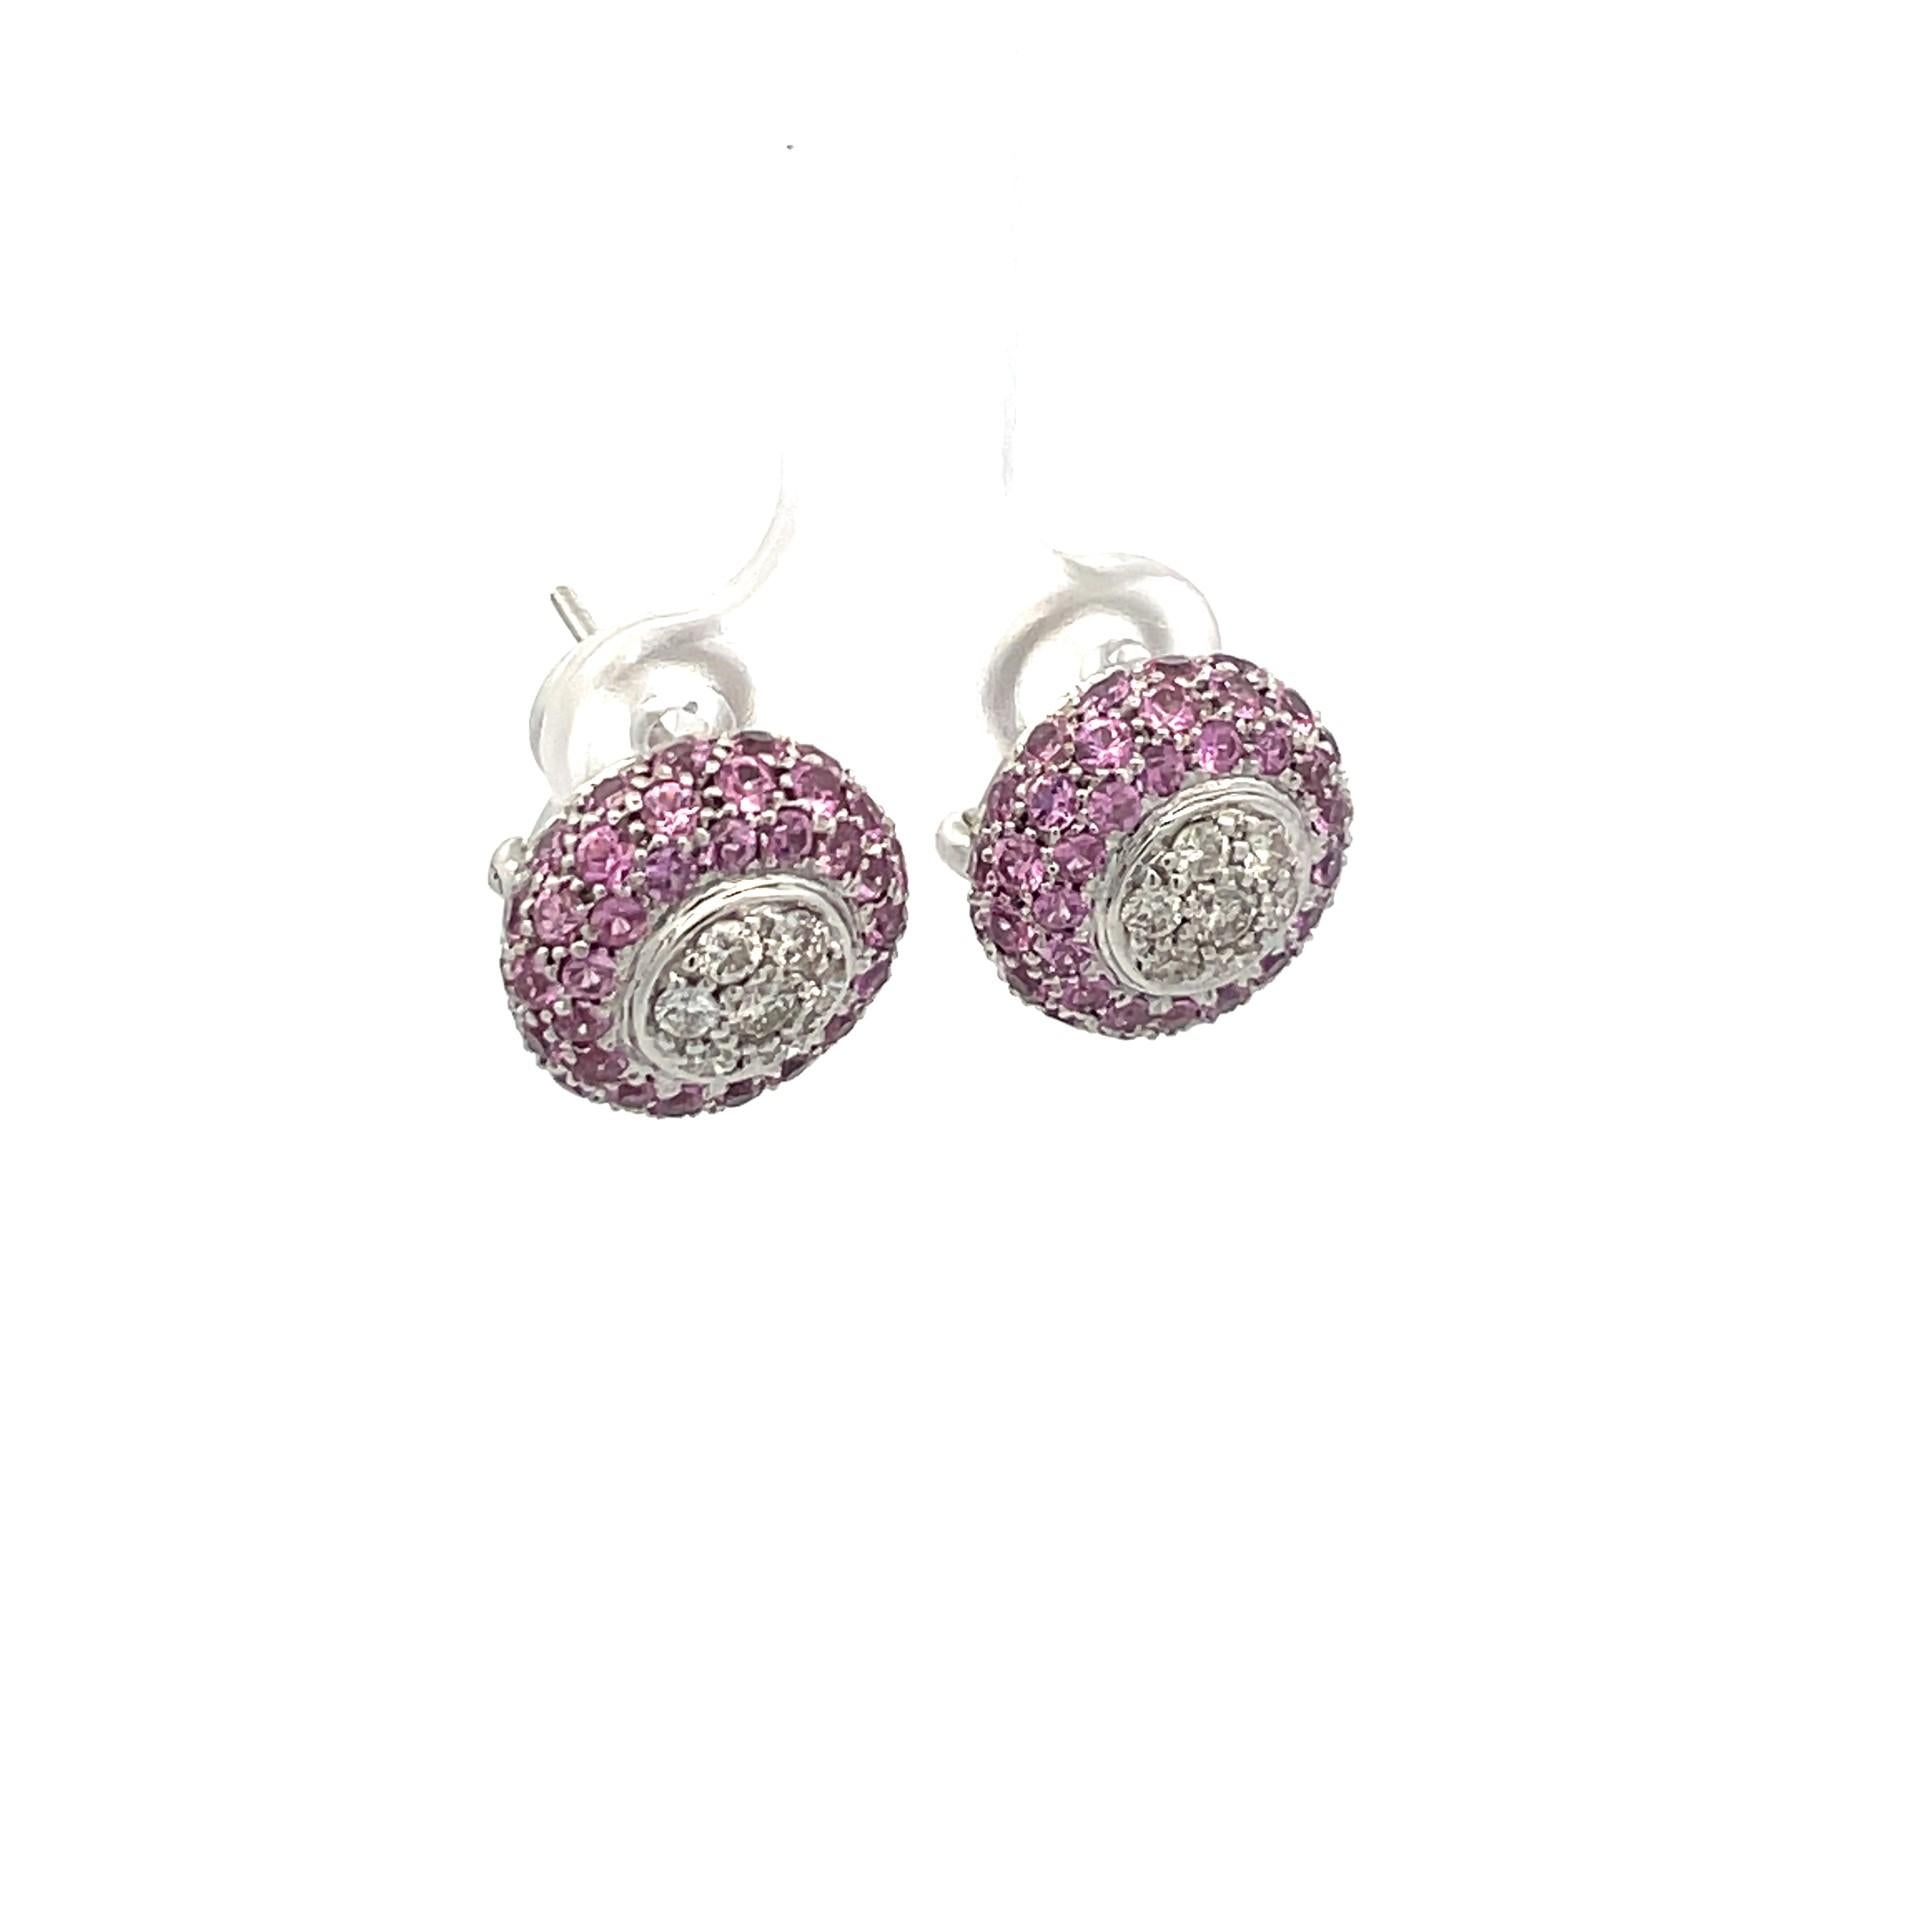 A pair of puff earring set with natural pink sapphires and brilliant cut diamonds in 18kt white gold with a straight post and omega clip system. 

96 natural pink sapphires 4.24ct total weight
14 brilliant cut diamonds 0.60ct total weight, quality